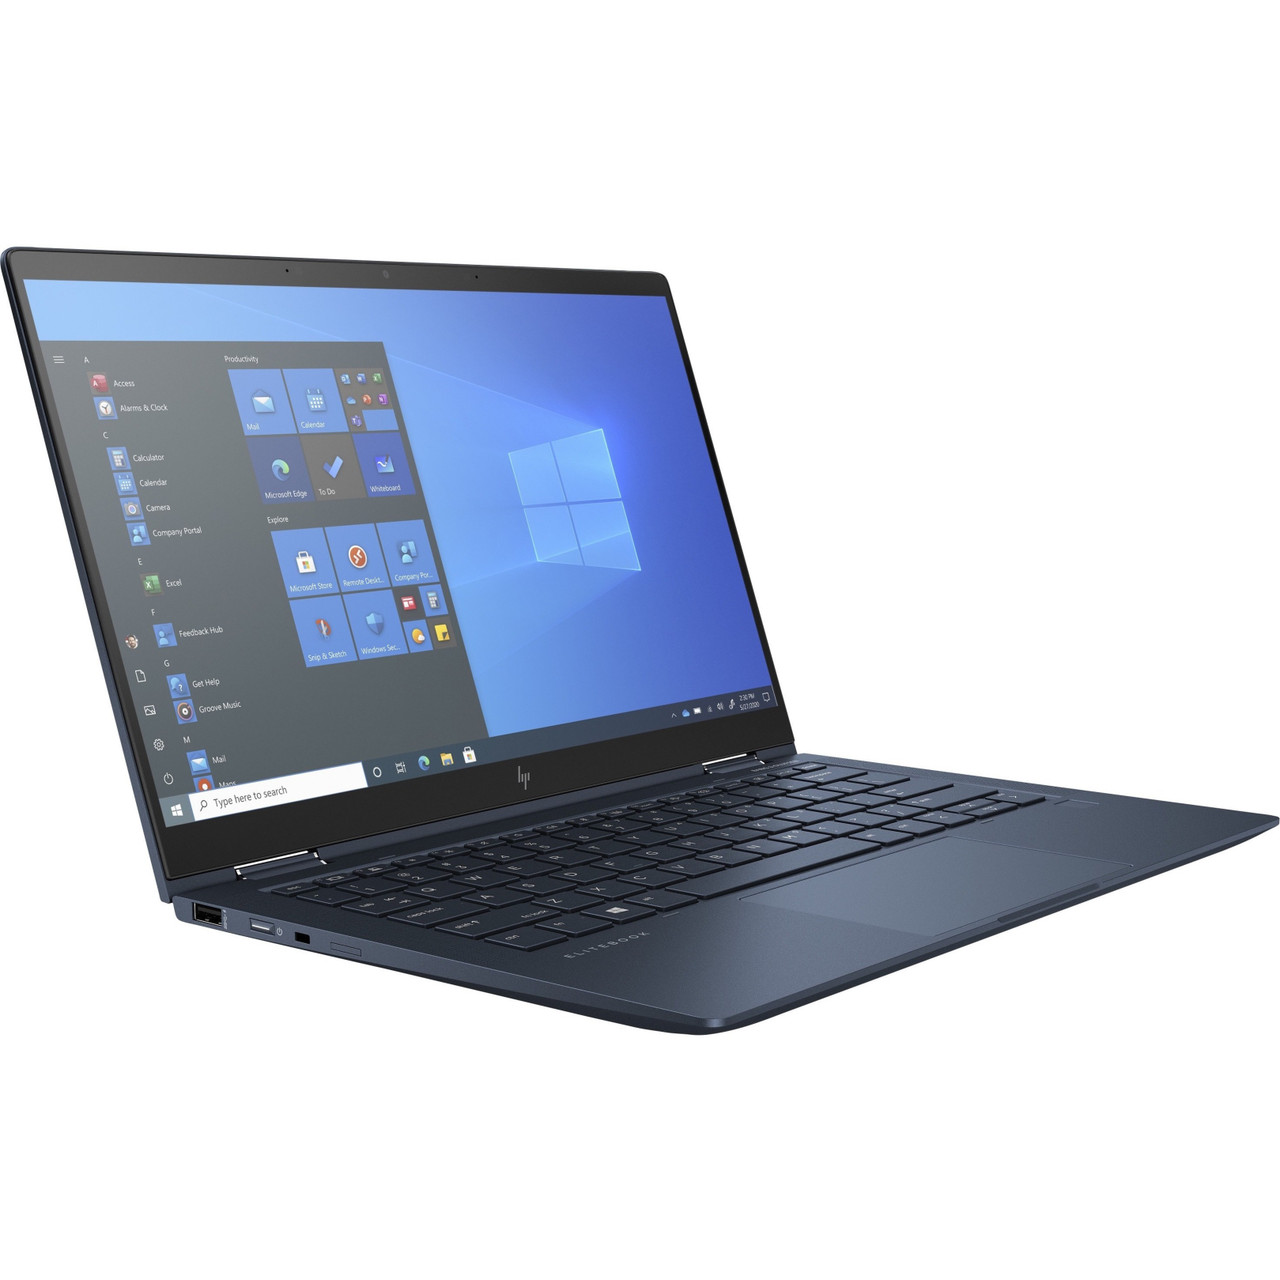 HP Elite Dragonfly G2 13.3" Touchscreen Rugged Convertible 2 in 1 Notebook - Intel Core i7 11th Gen i7-1185G7 Quad-core (4 Core) - 32 GB Total RAM - 256 GB SSD - 3Y614UP#ABA